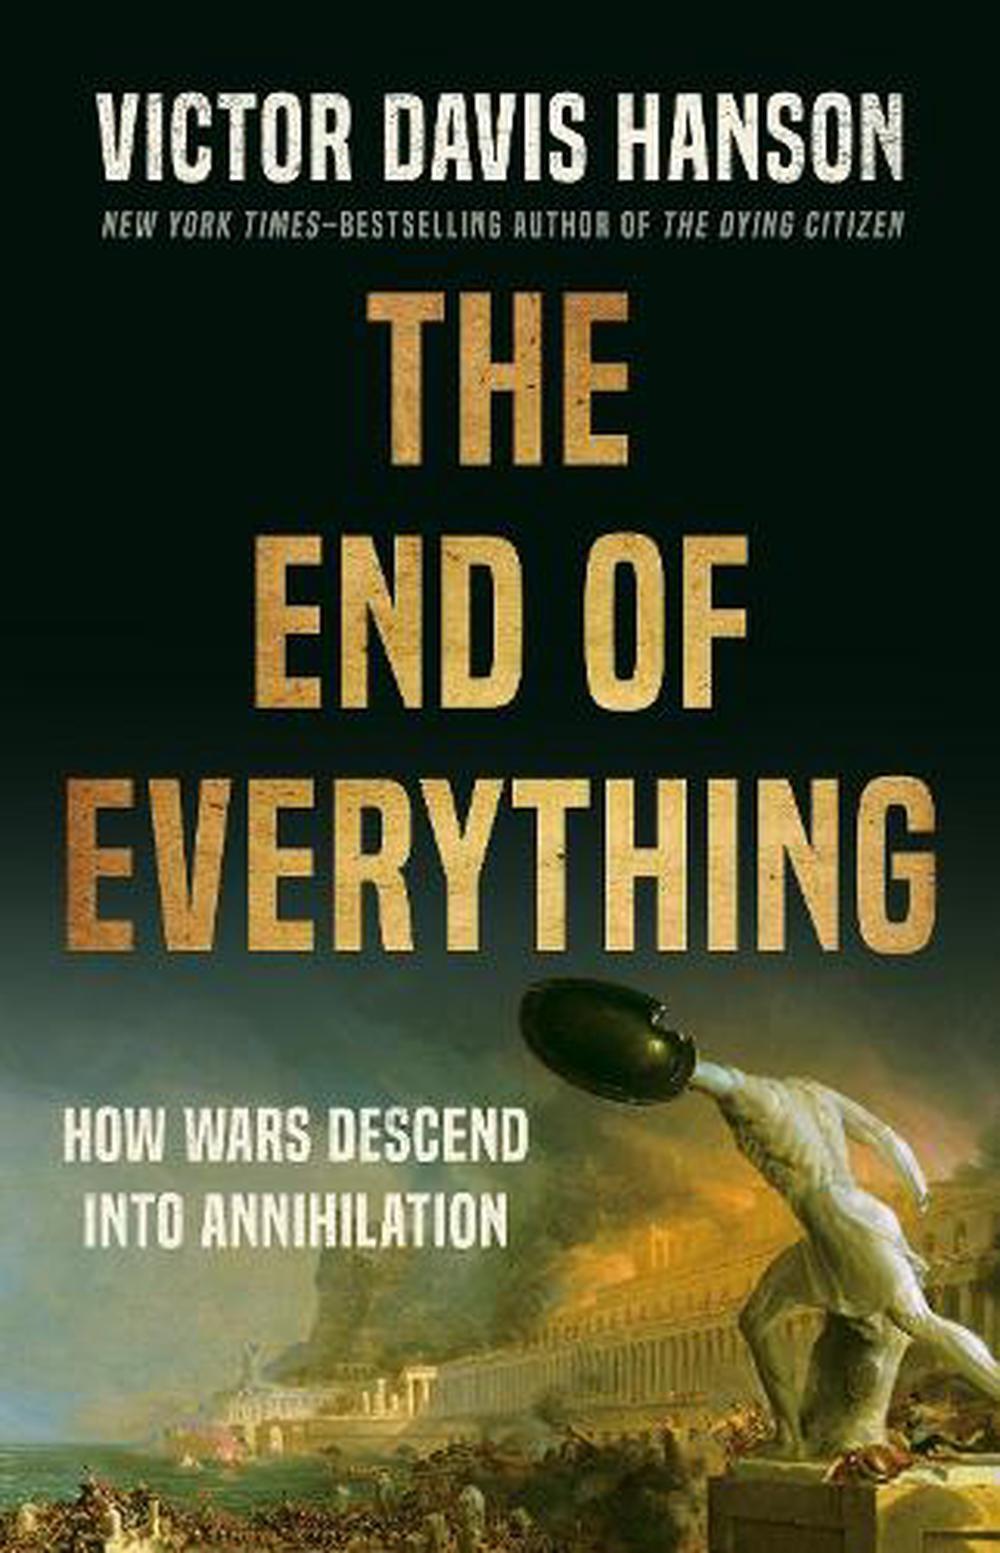 The End of Everything: How Wars Descend into Annihilation by Victor D. Hanson Ha